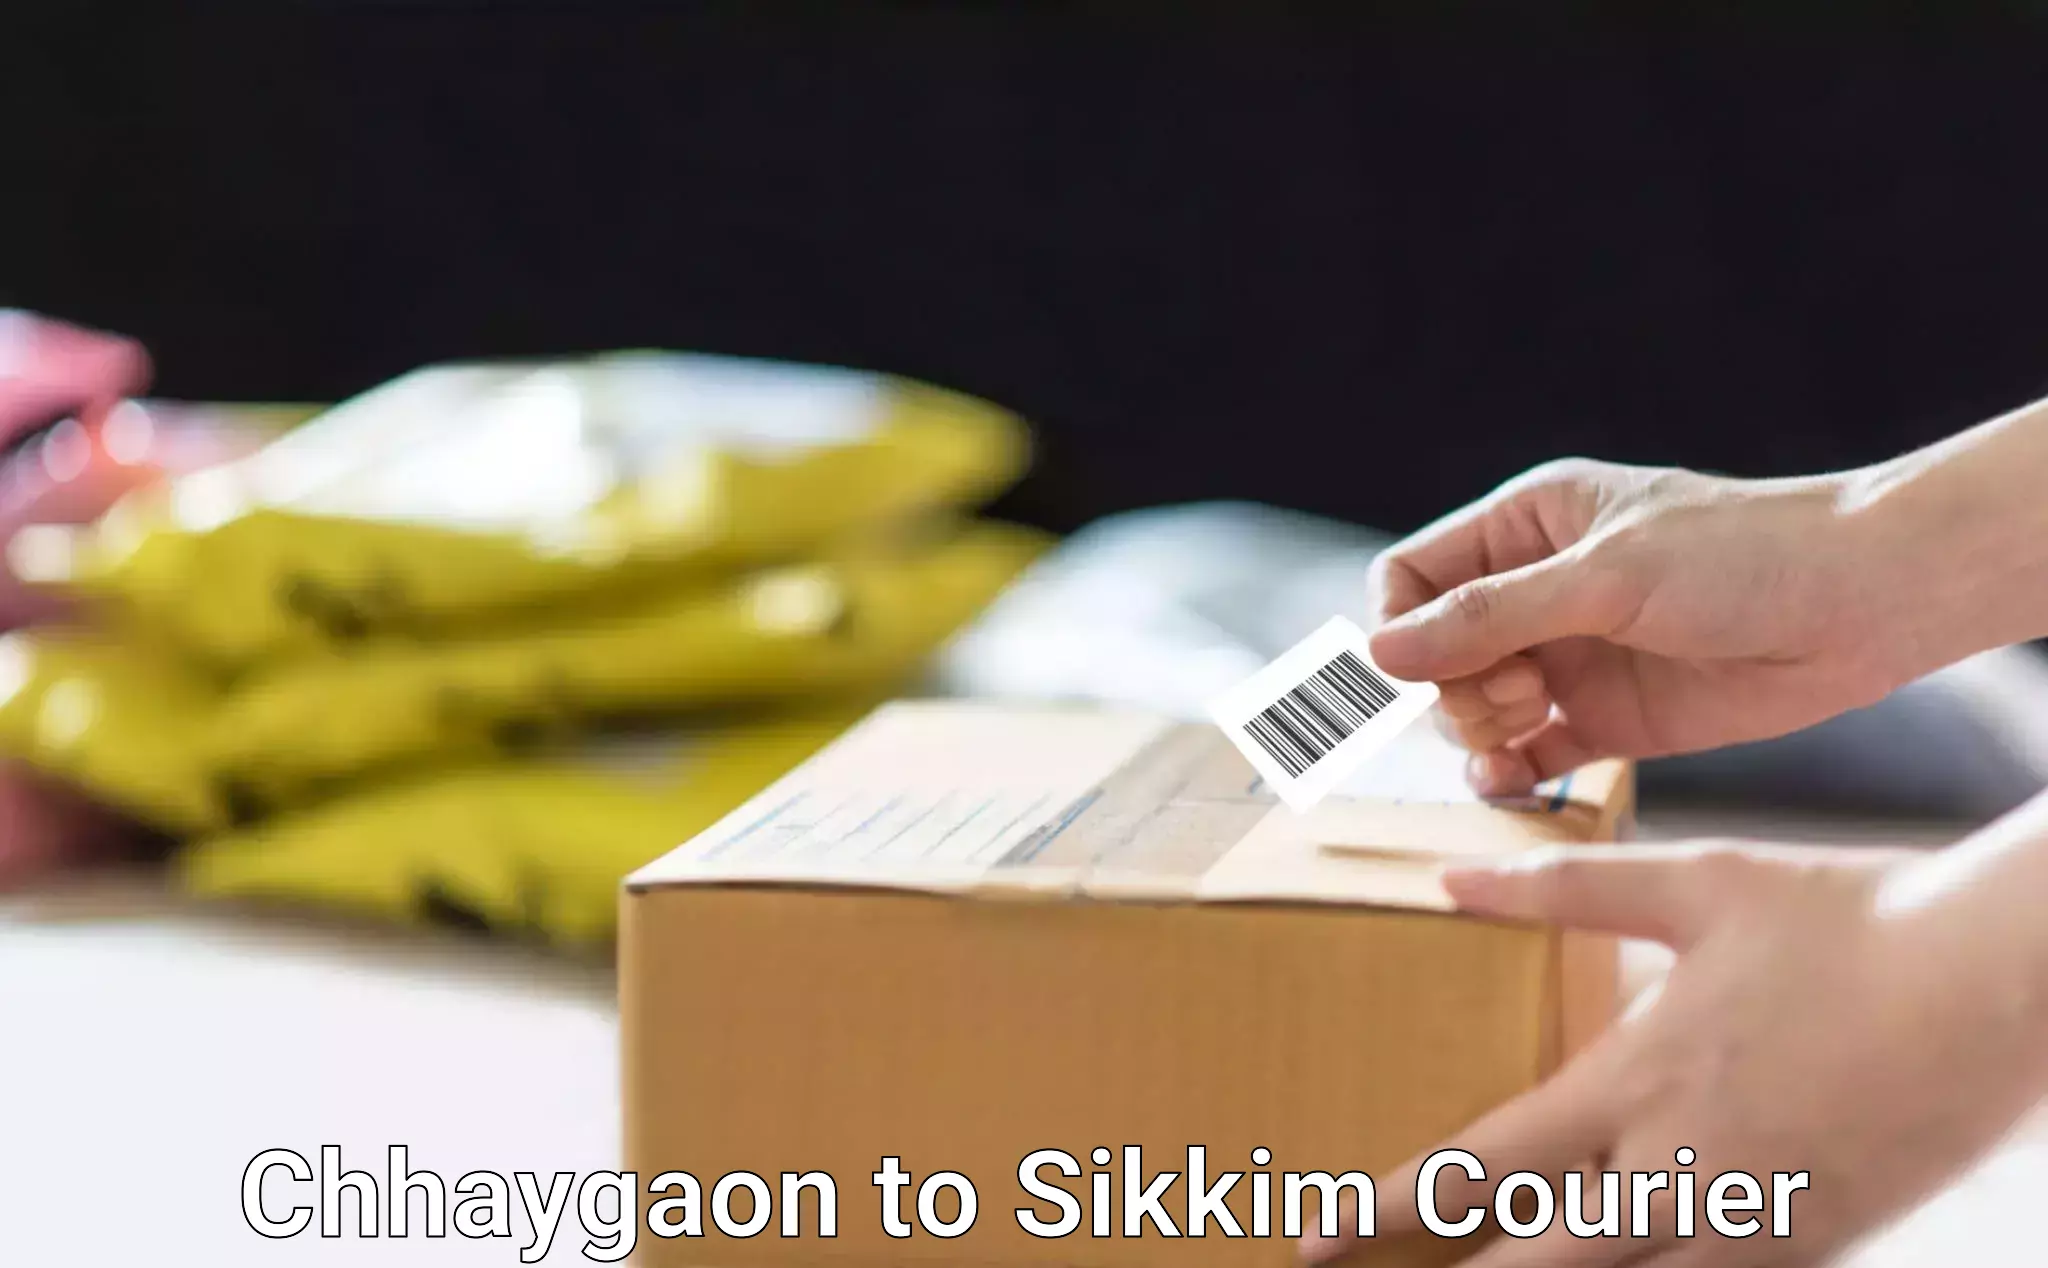 Customer-friendly courier services Chhaygaon to South Sikkim